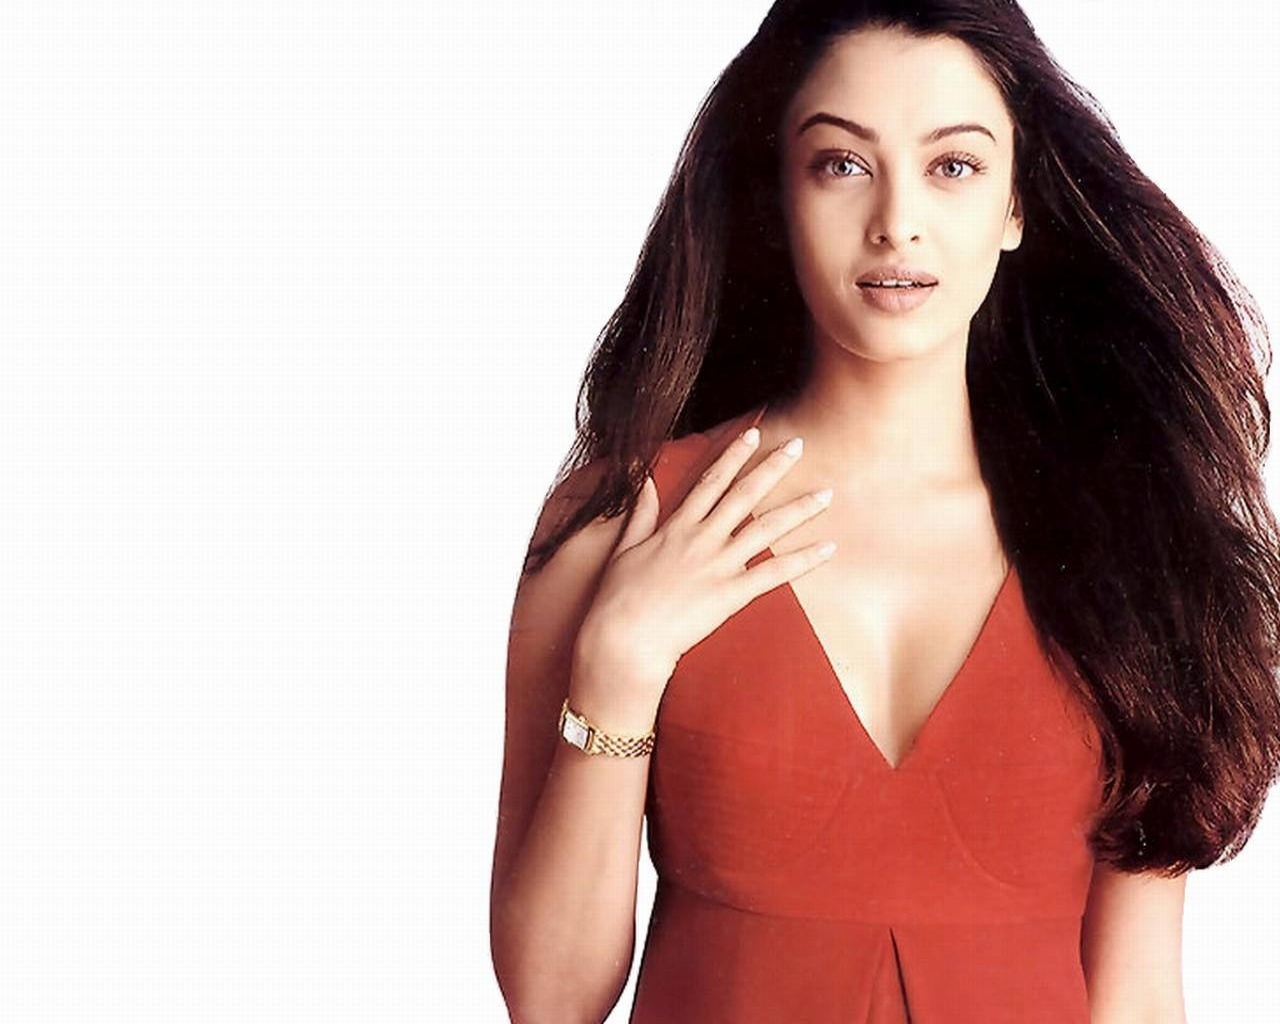 Aishwarya Rai Bollywood Actress Wallpapers In Jpg Format For Free Download See more of aishwarya rai bollywood on facebook. all free download com